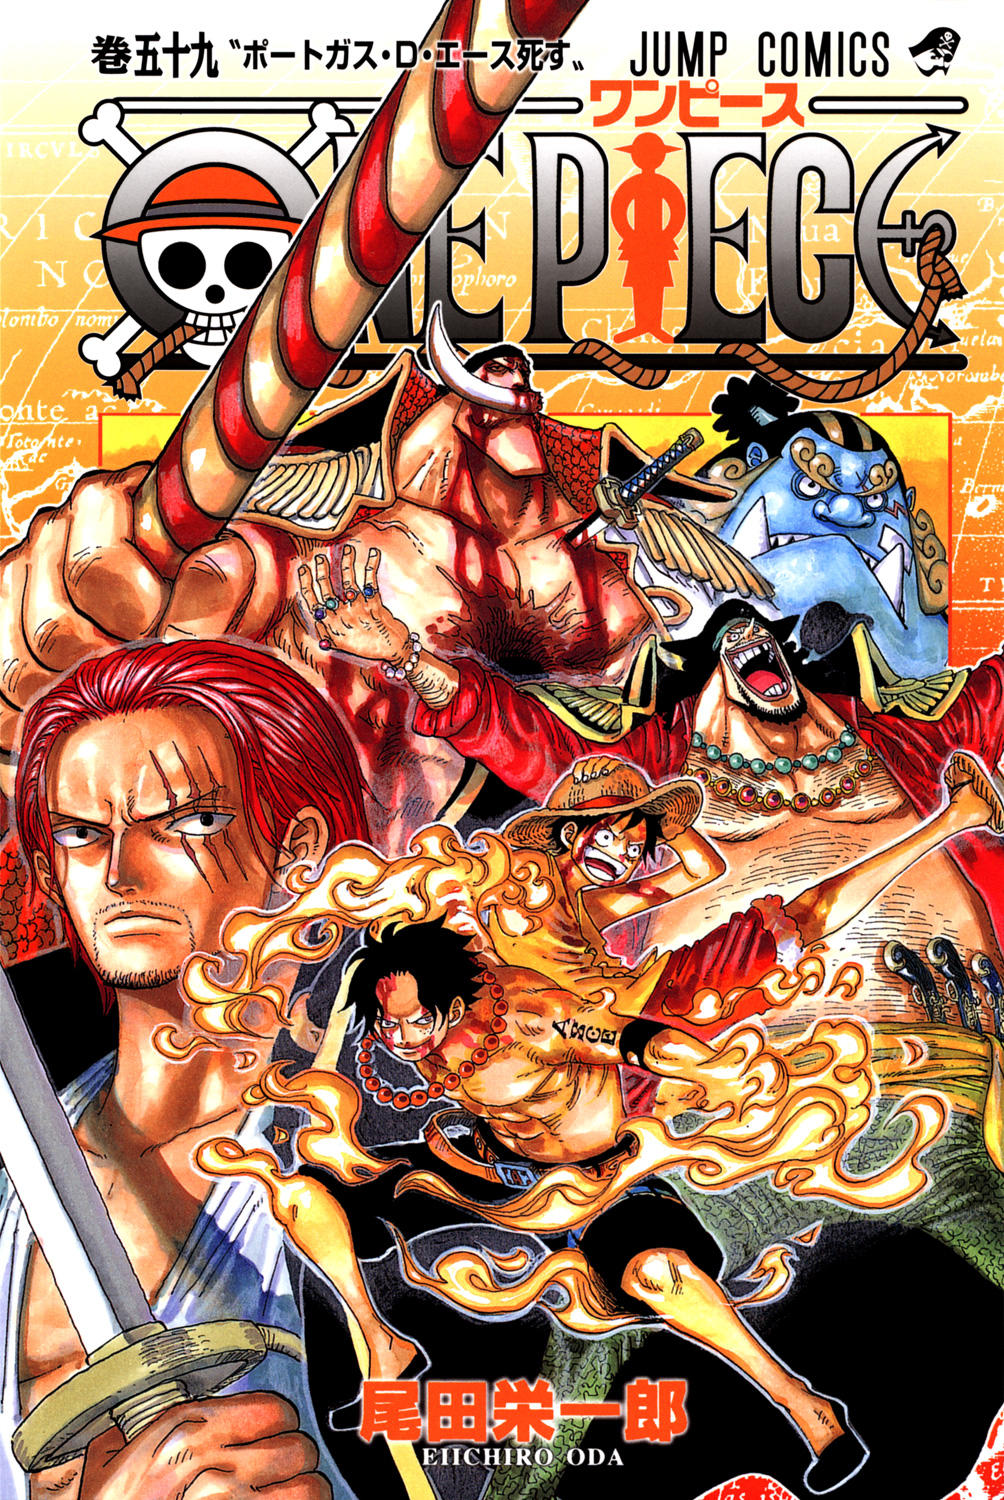 Read One Piece - Digital Colored Comics Vol.59 Chapter 574